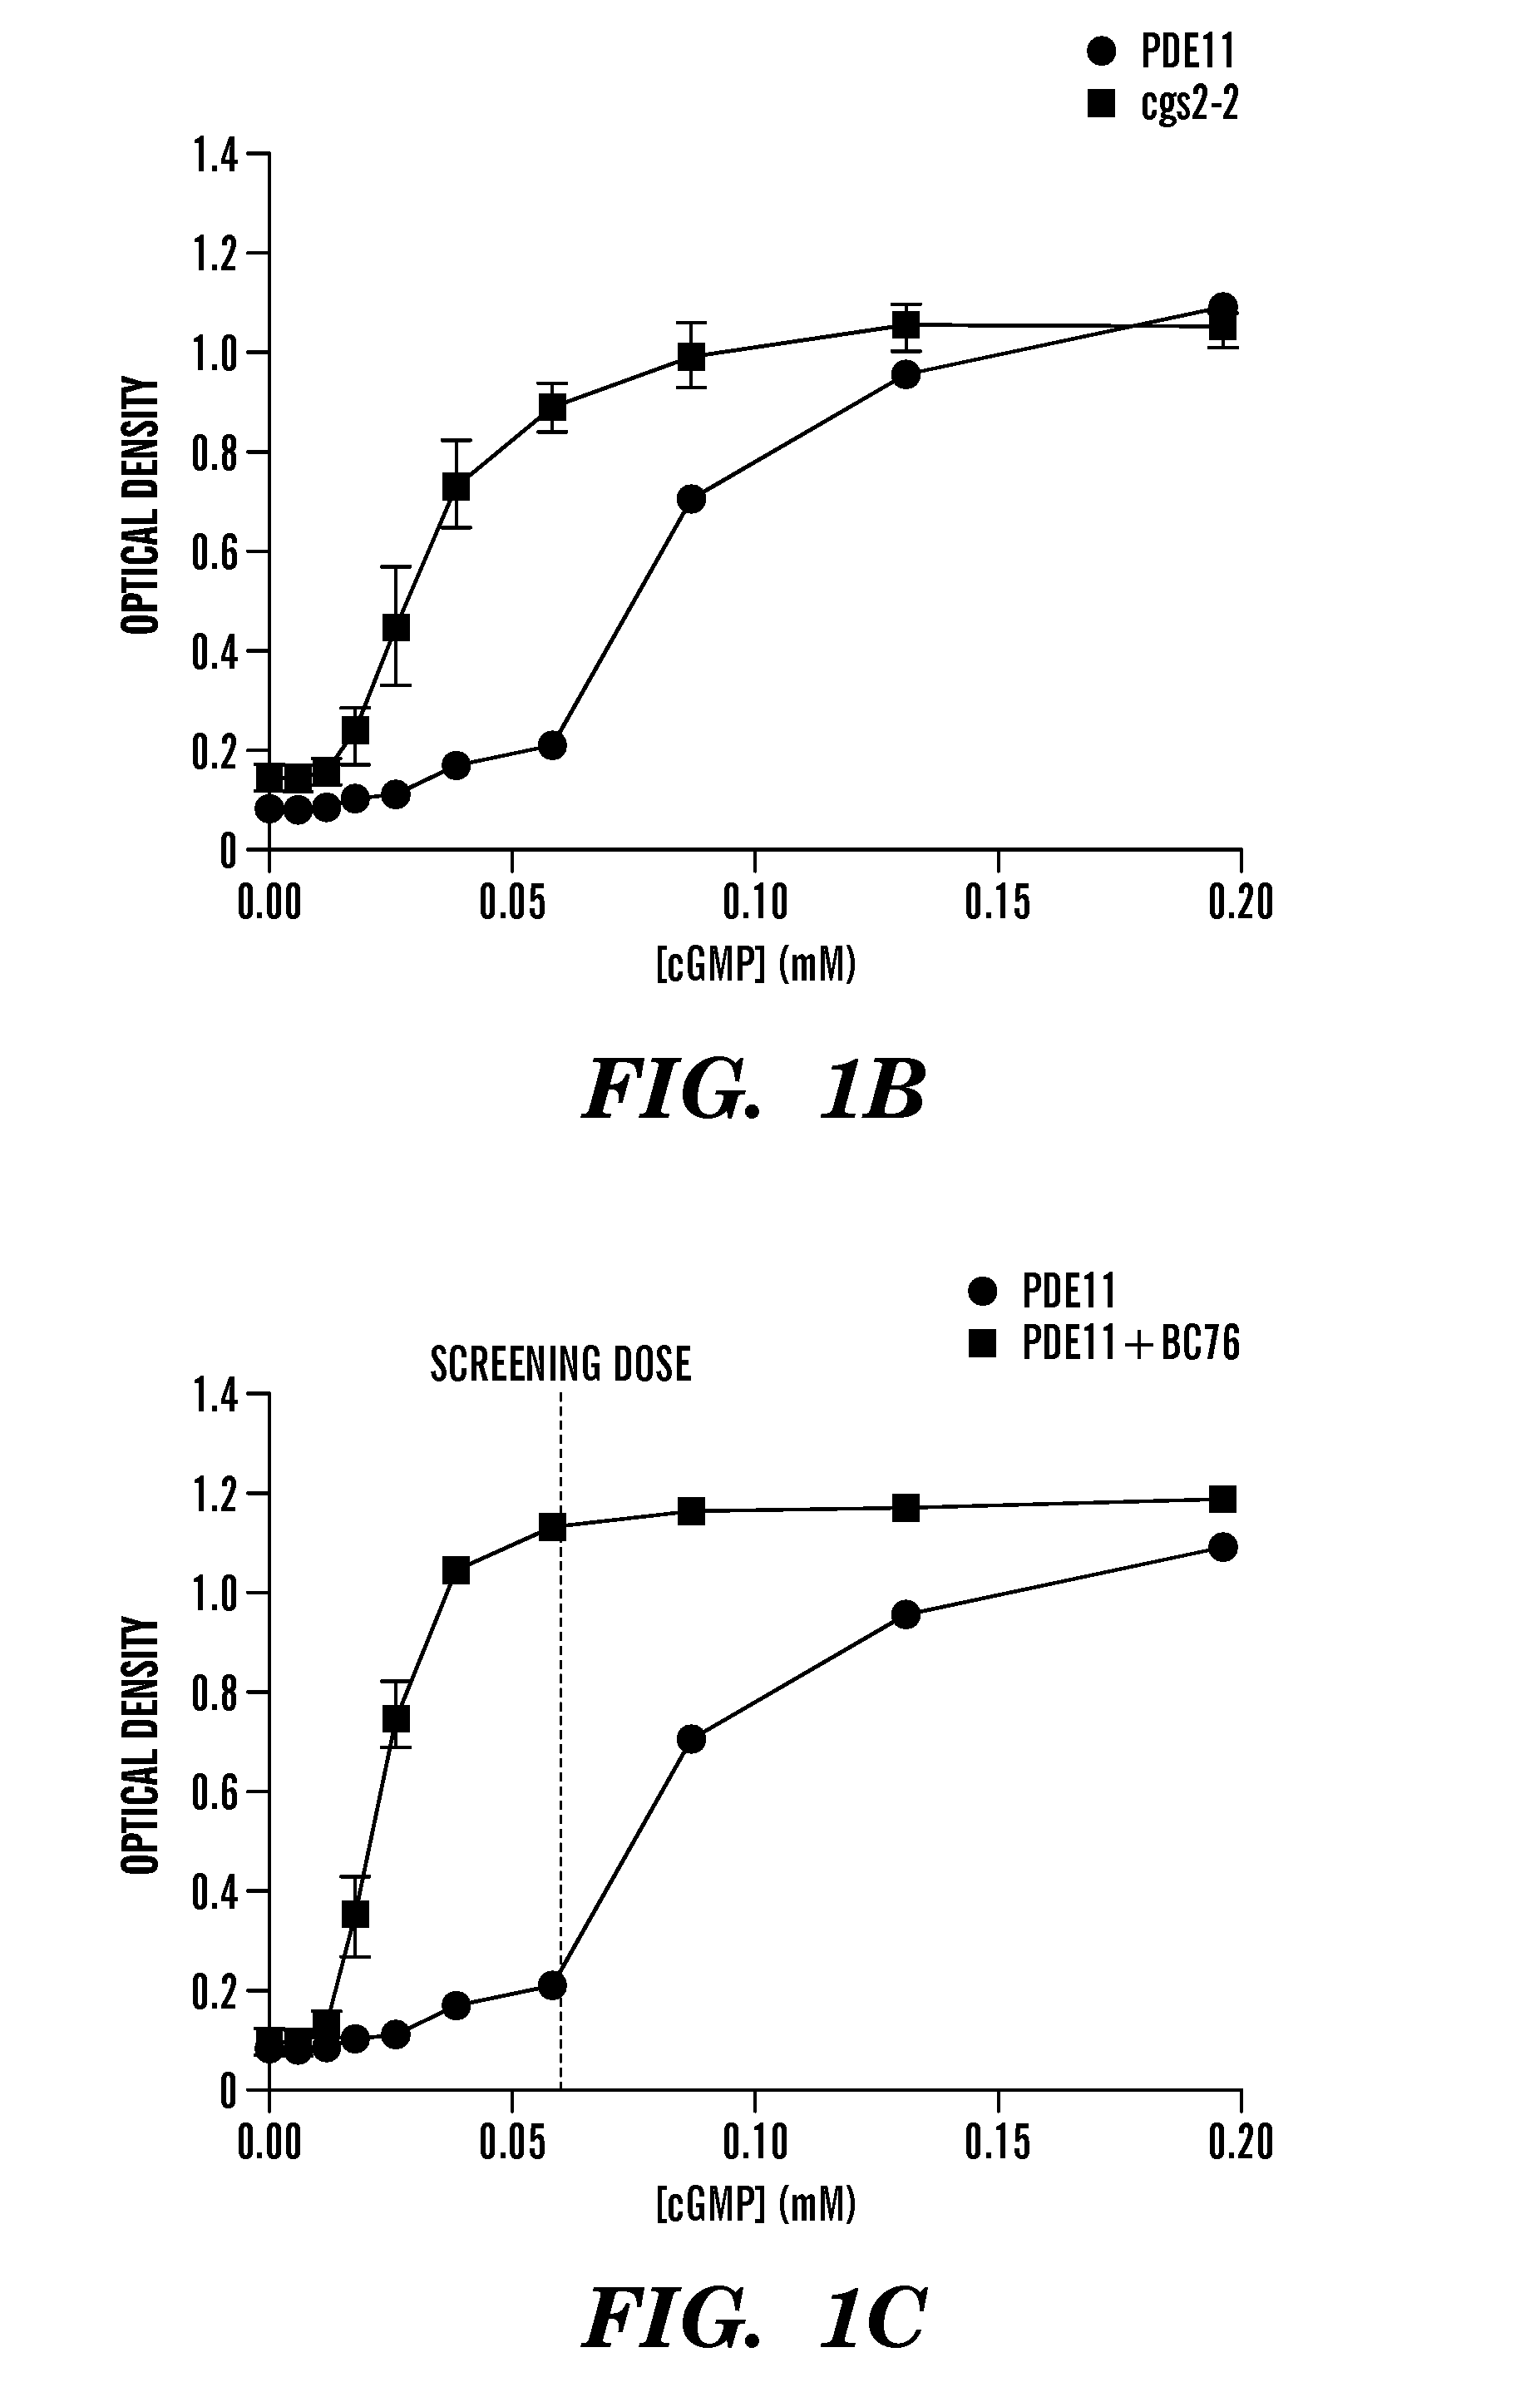 Inhibitors of phospodiesterases 11 (PDE11) and methods of use to elevate cortisol production